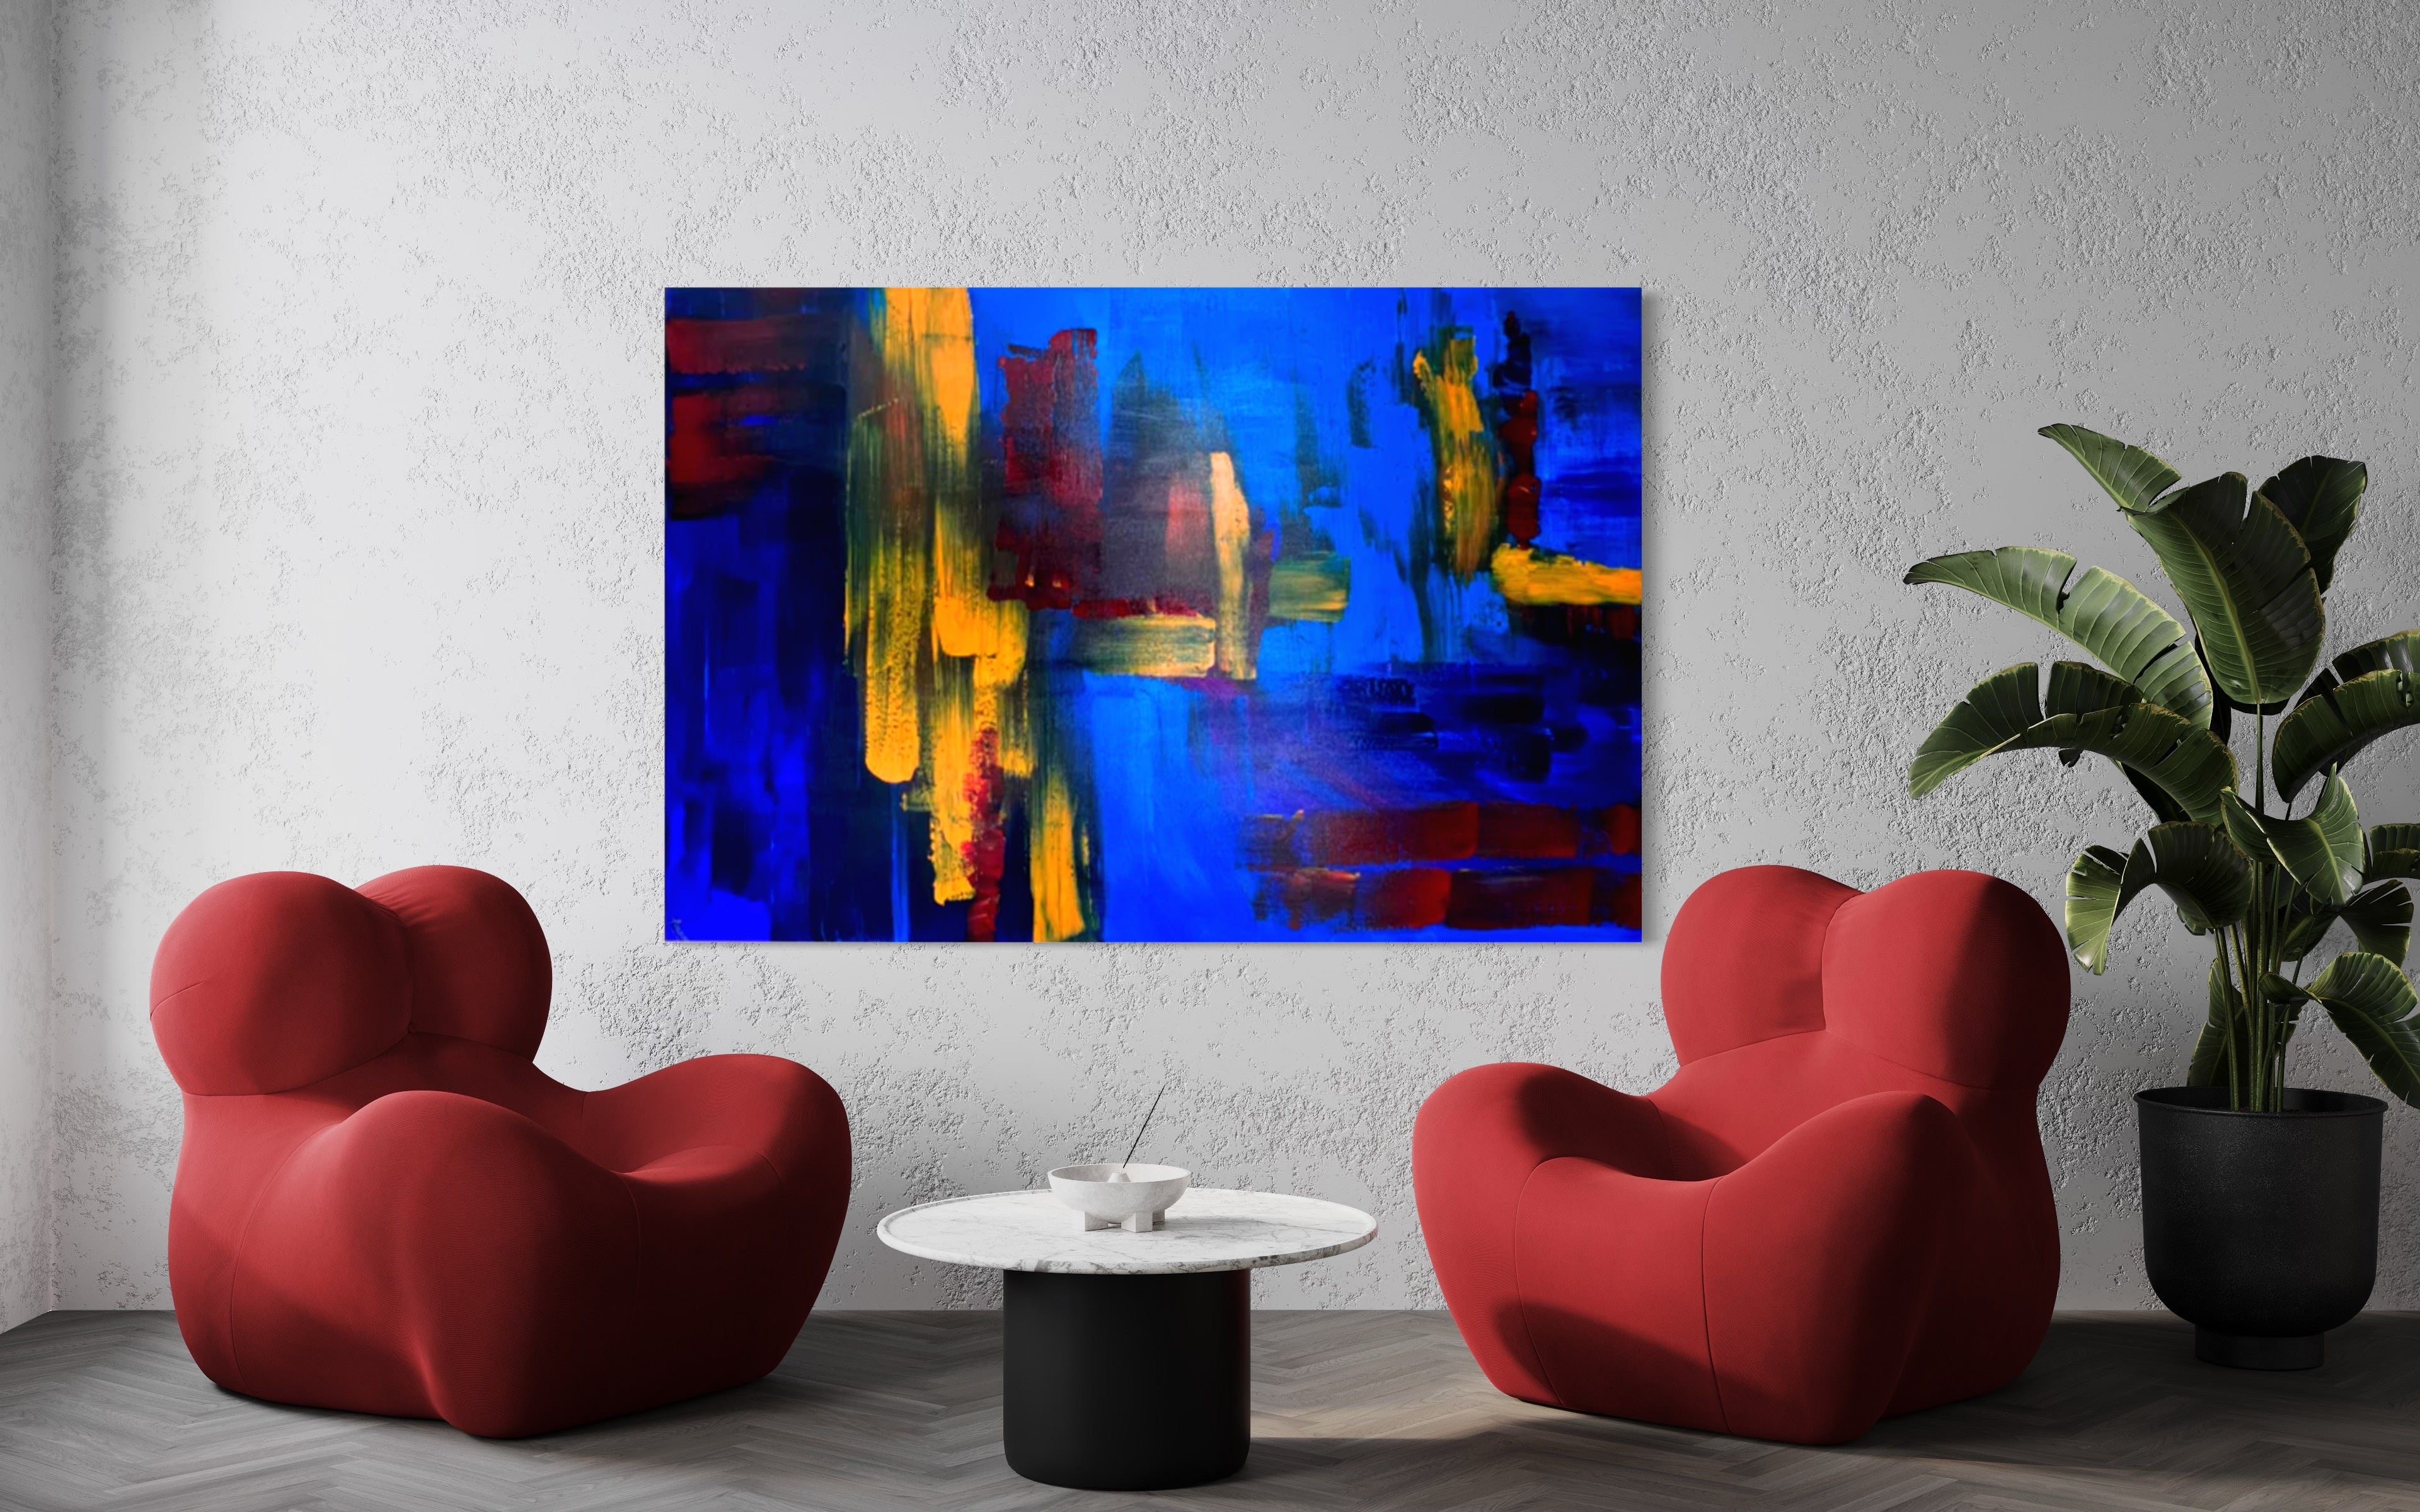 Endless 121.8 cm x 182.8 cm Abstract Painting by Joanne Daniel